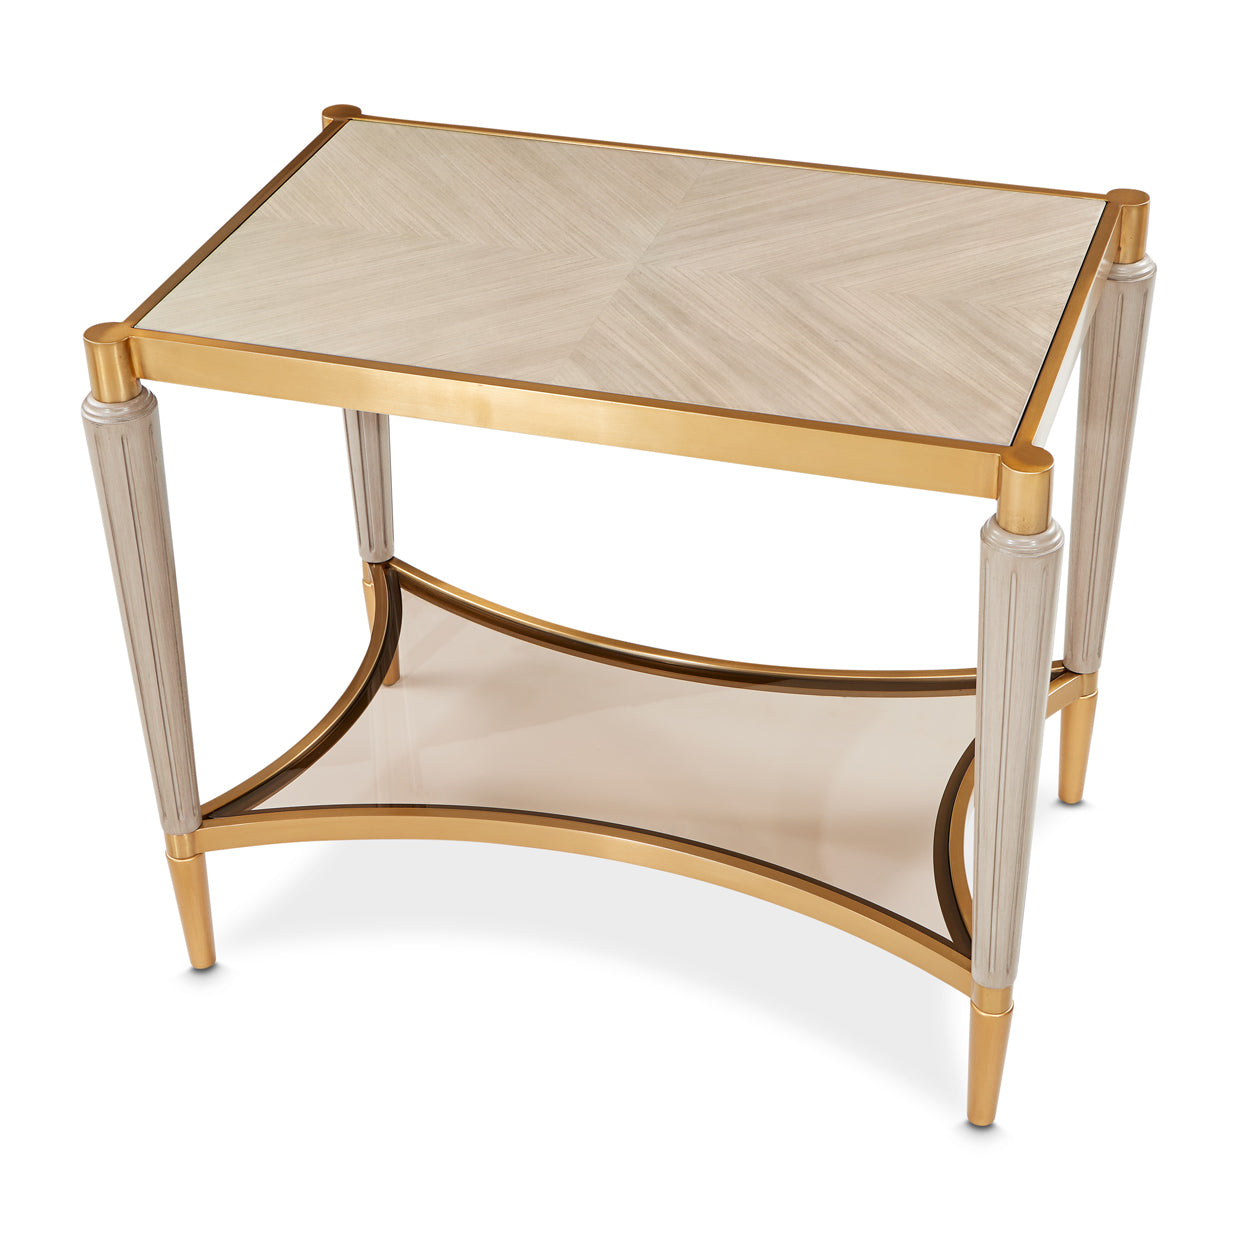 End Table,St Charles,natural grain,bronze frame,touch of sophistication